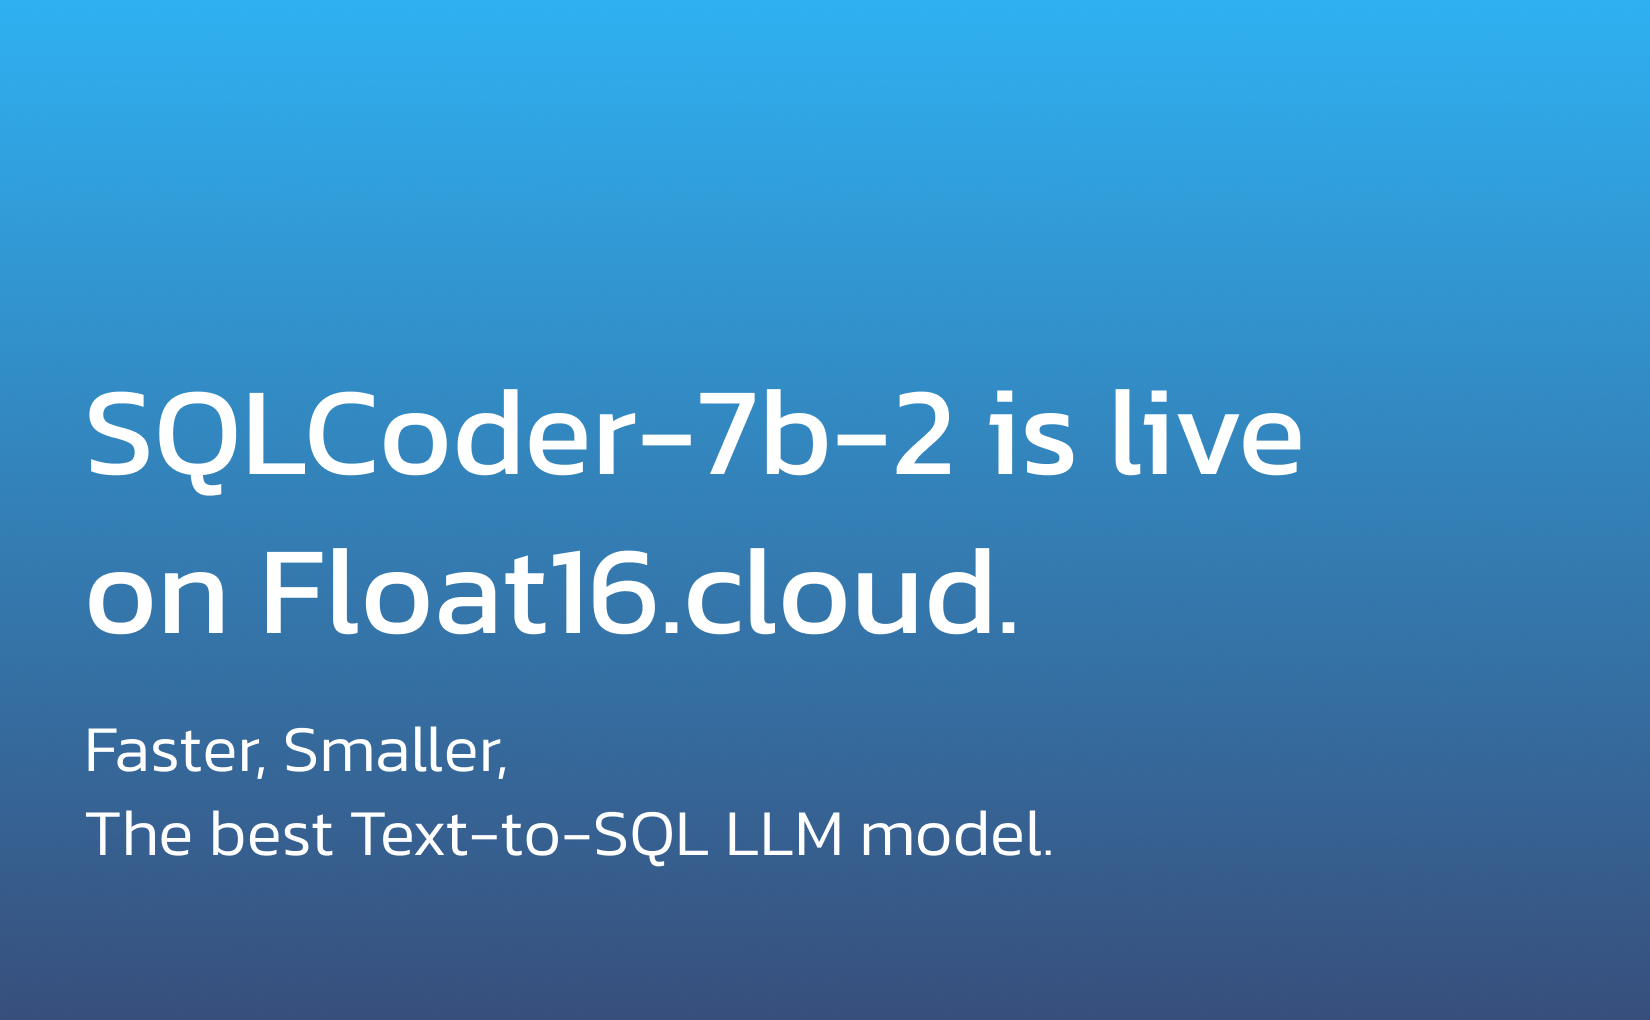 SQLCoder-7b-2 is live.